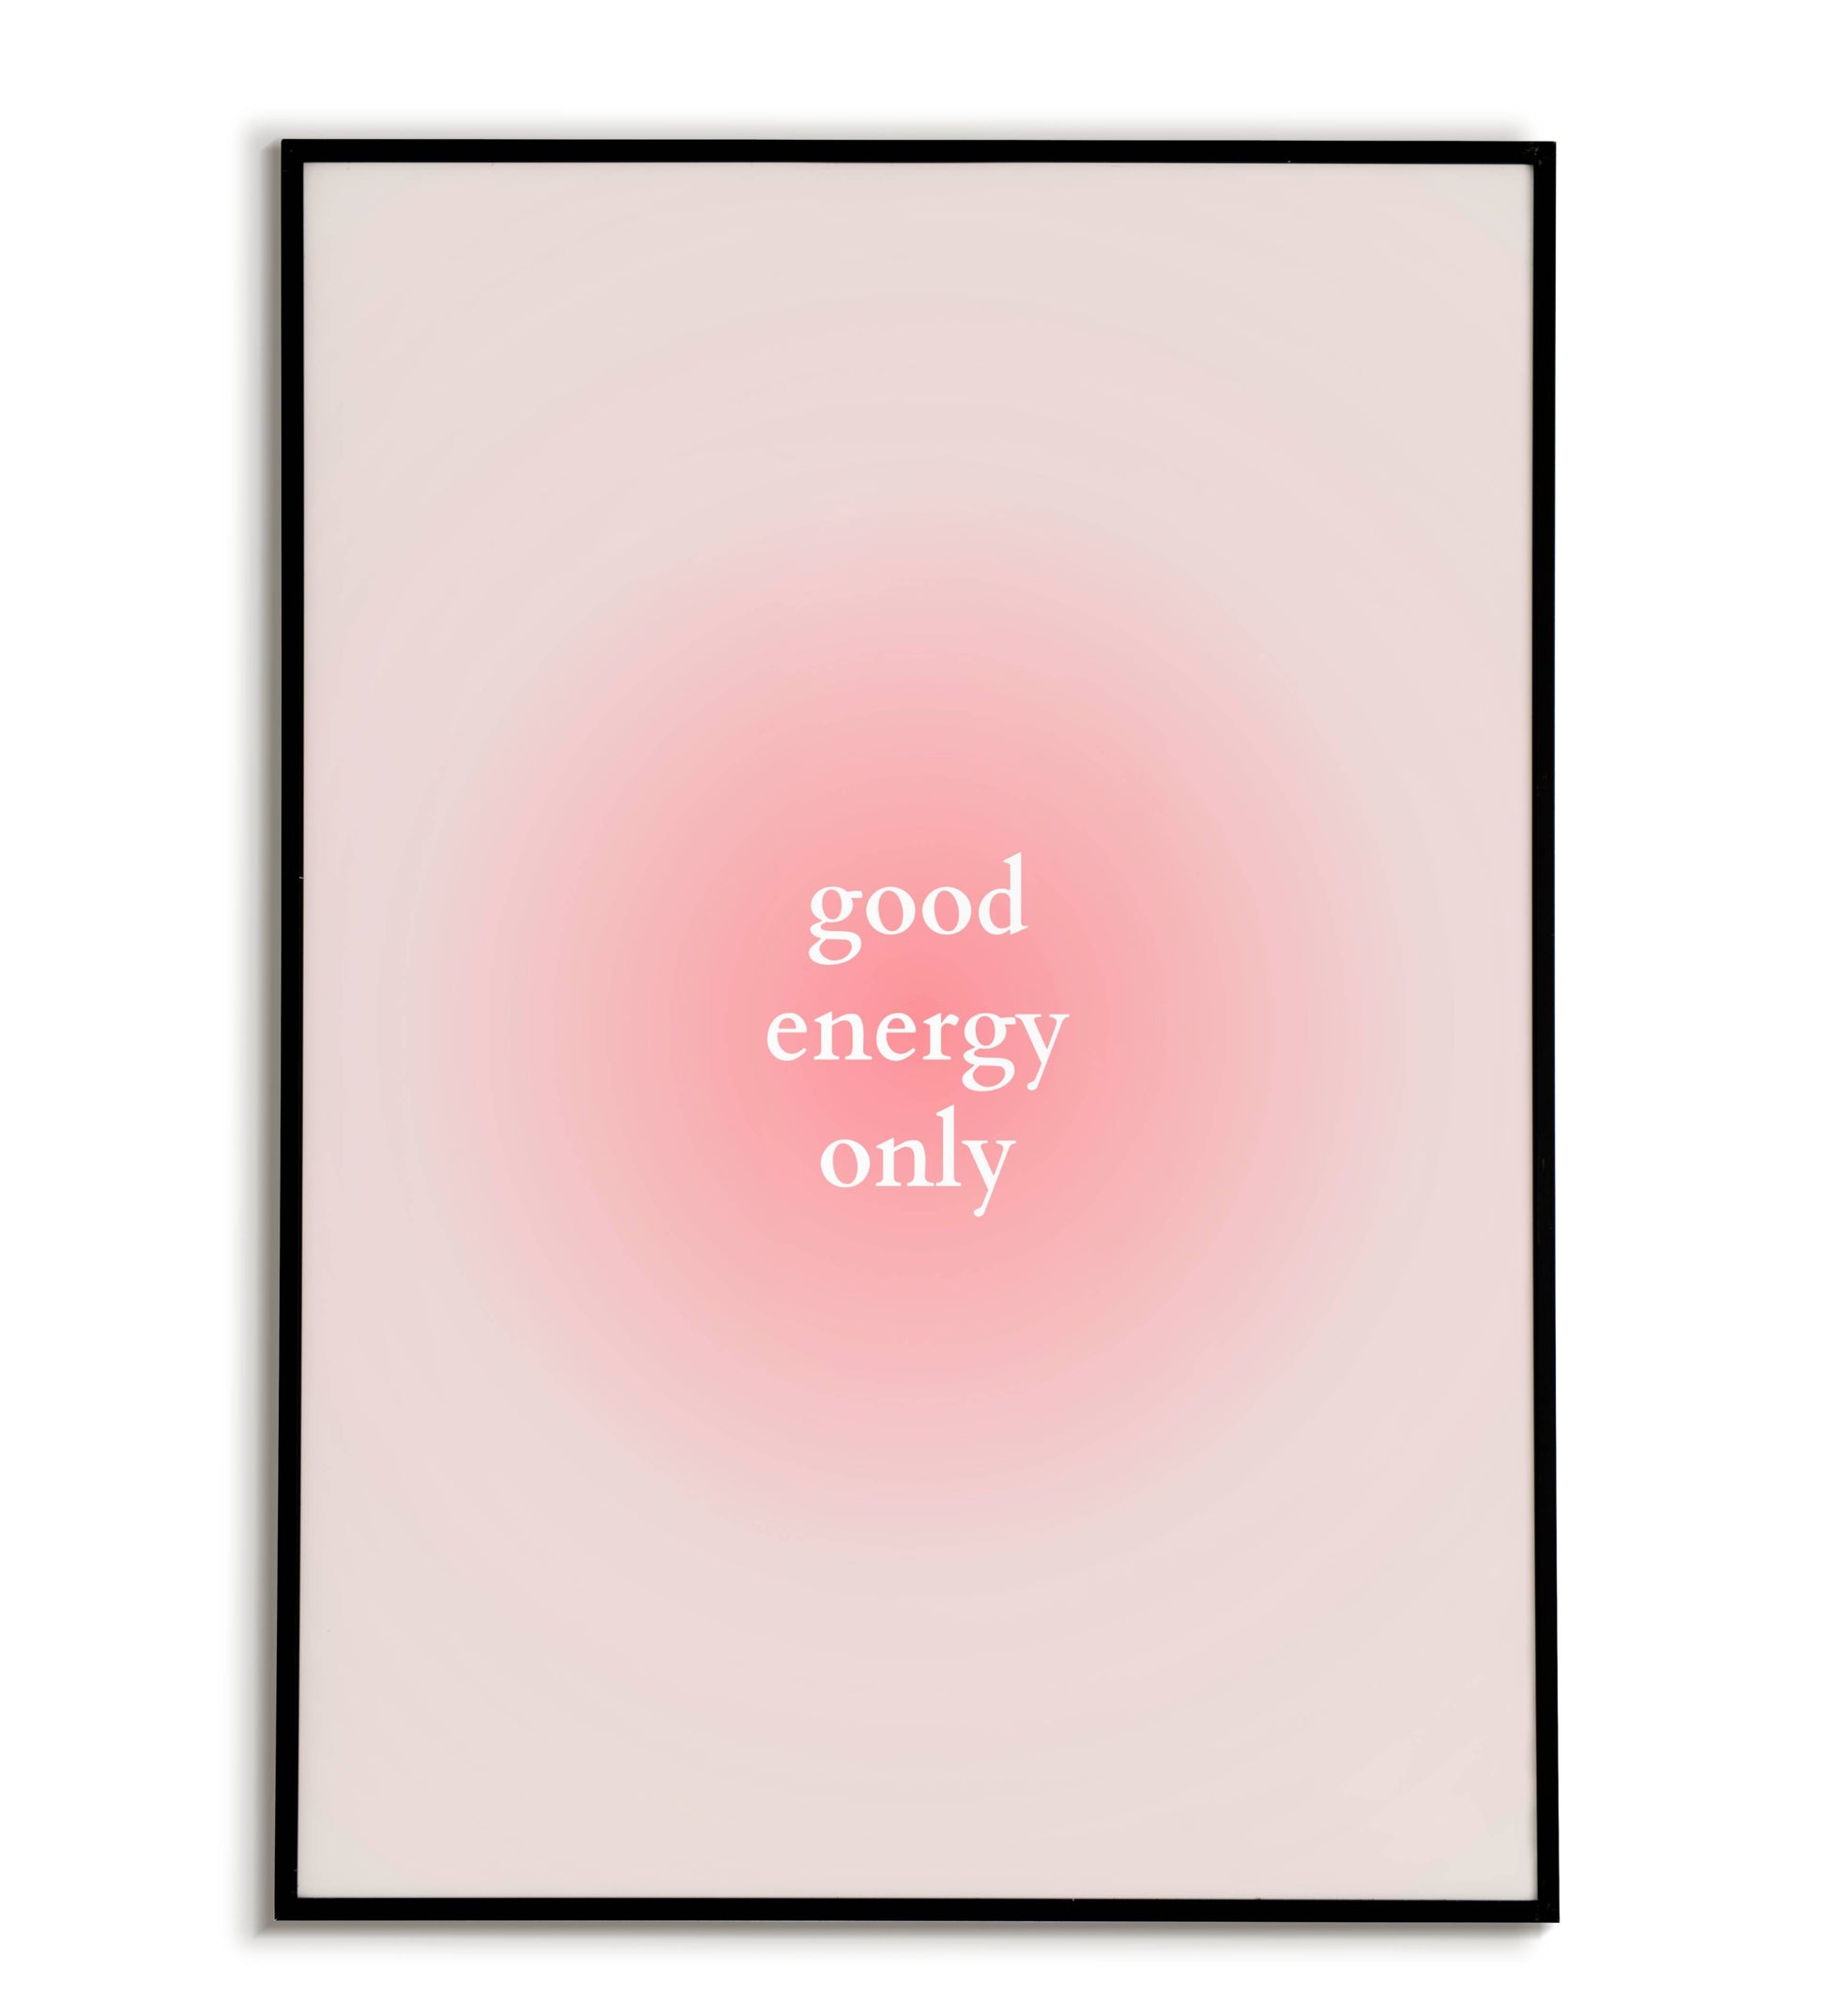 "Good energy only" printable motivational poster for a positive vibes message.